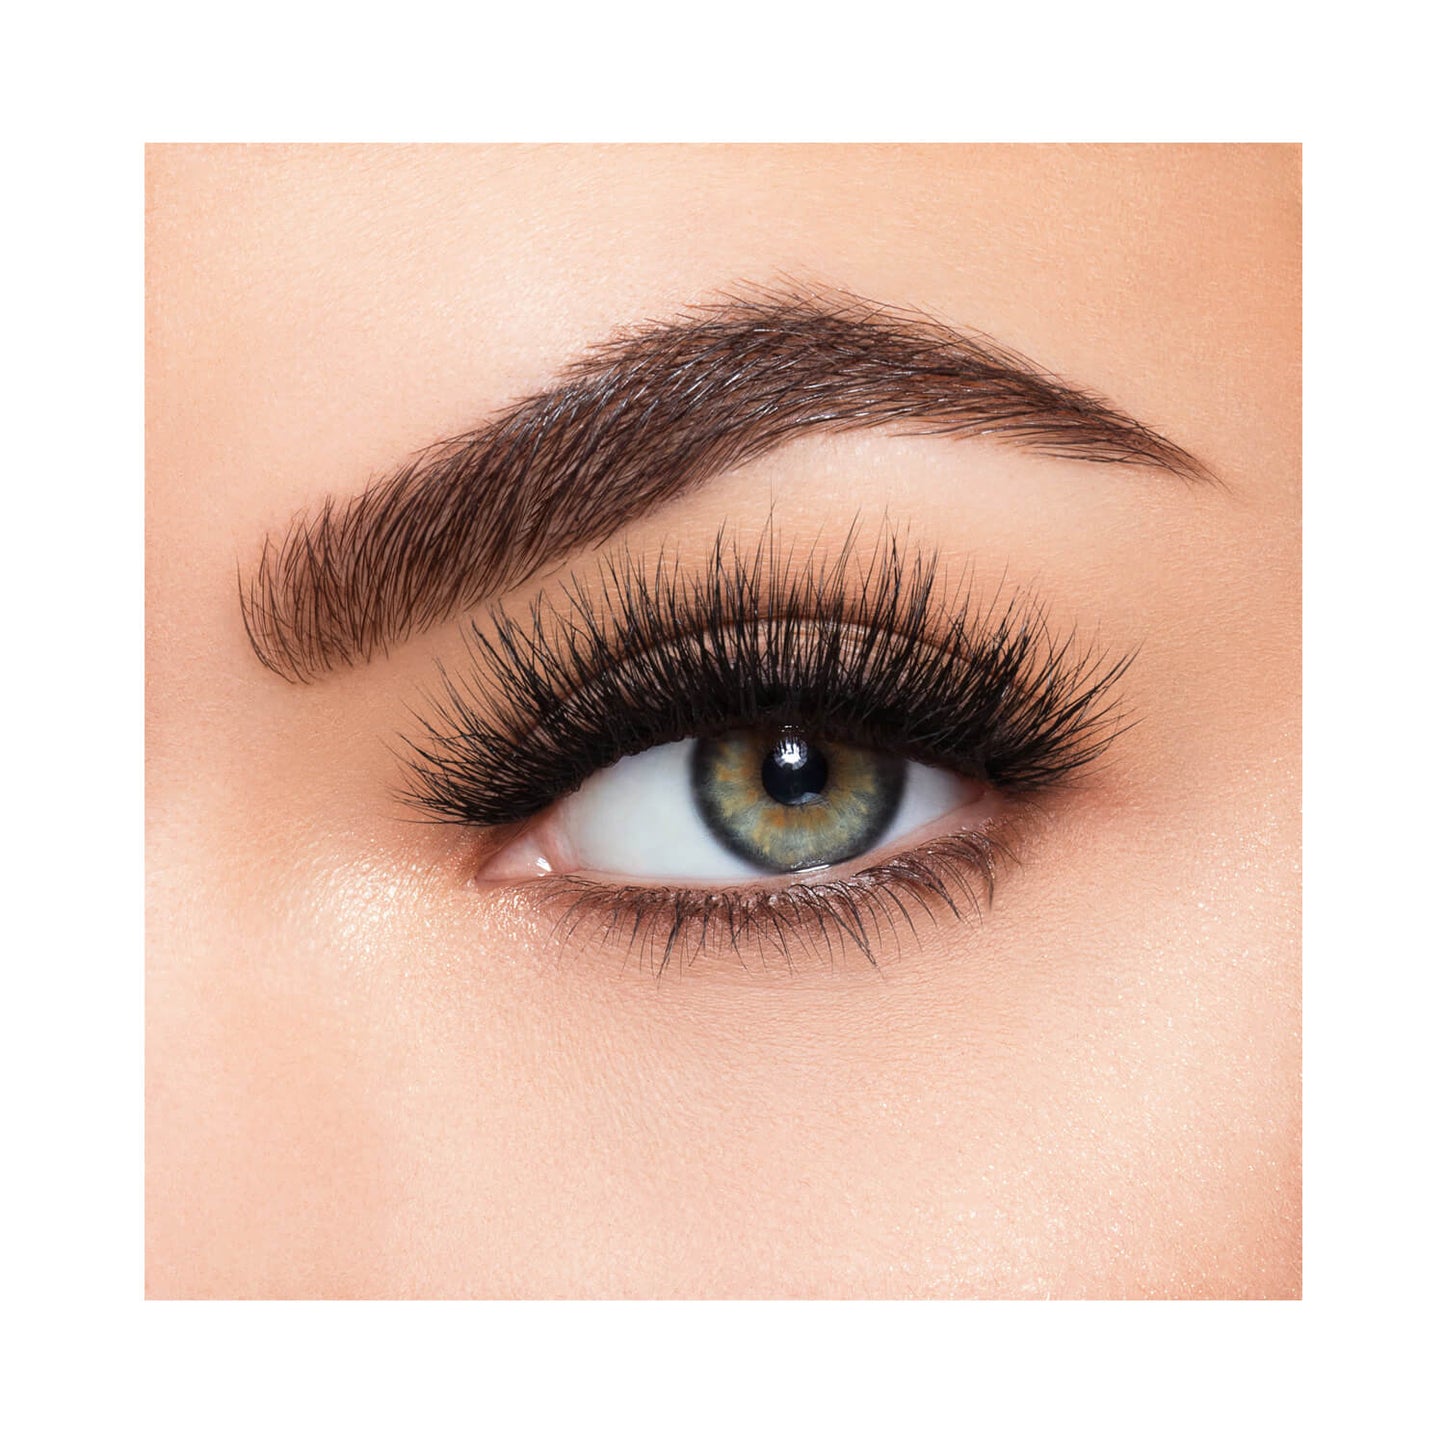 Lilly Lashes Hollywood 3D Mink Lashes